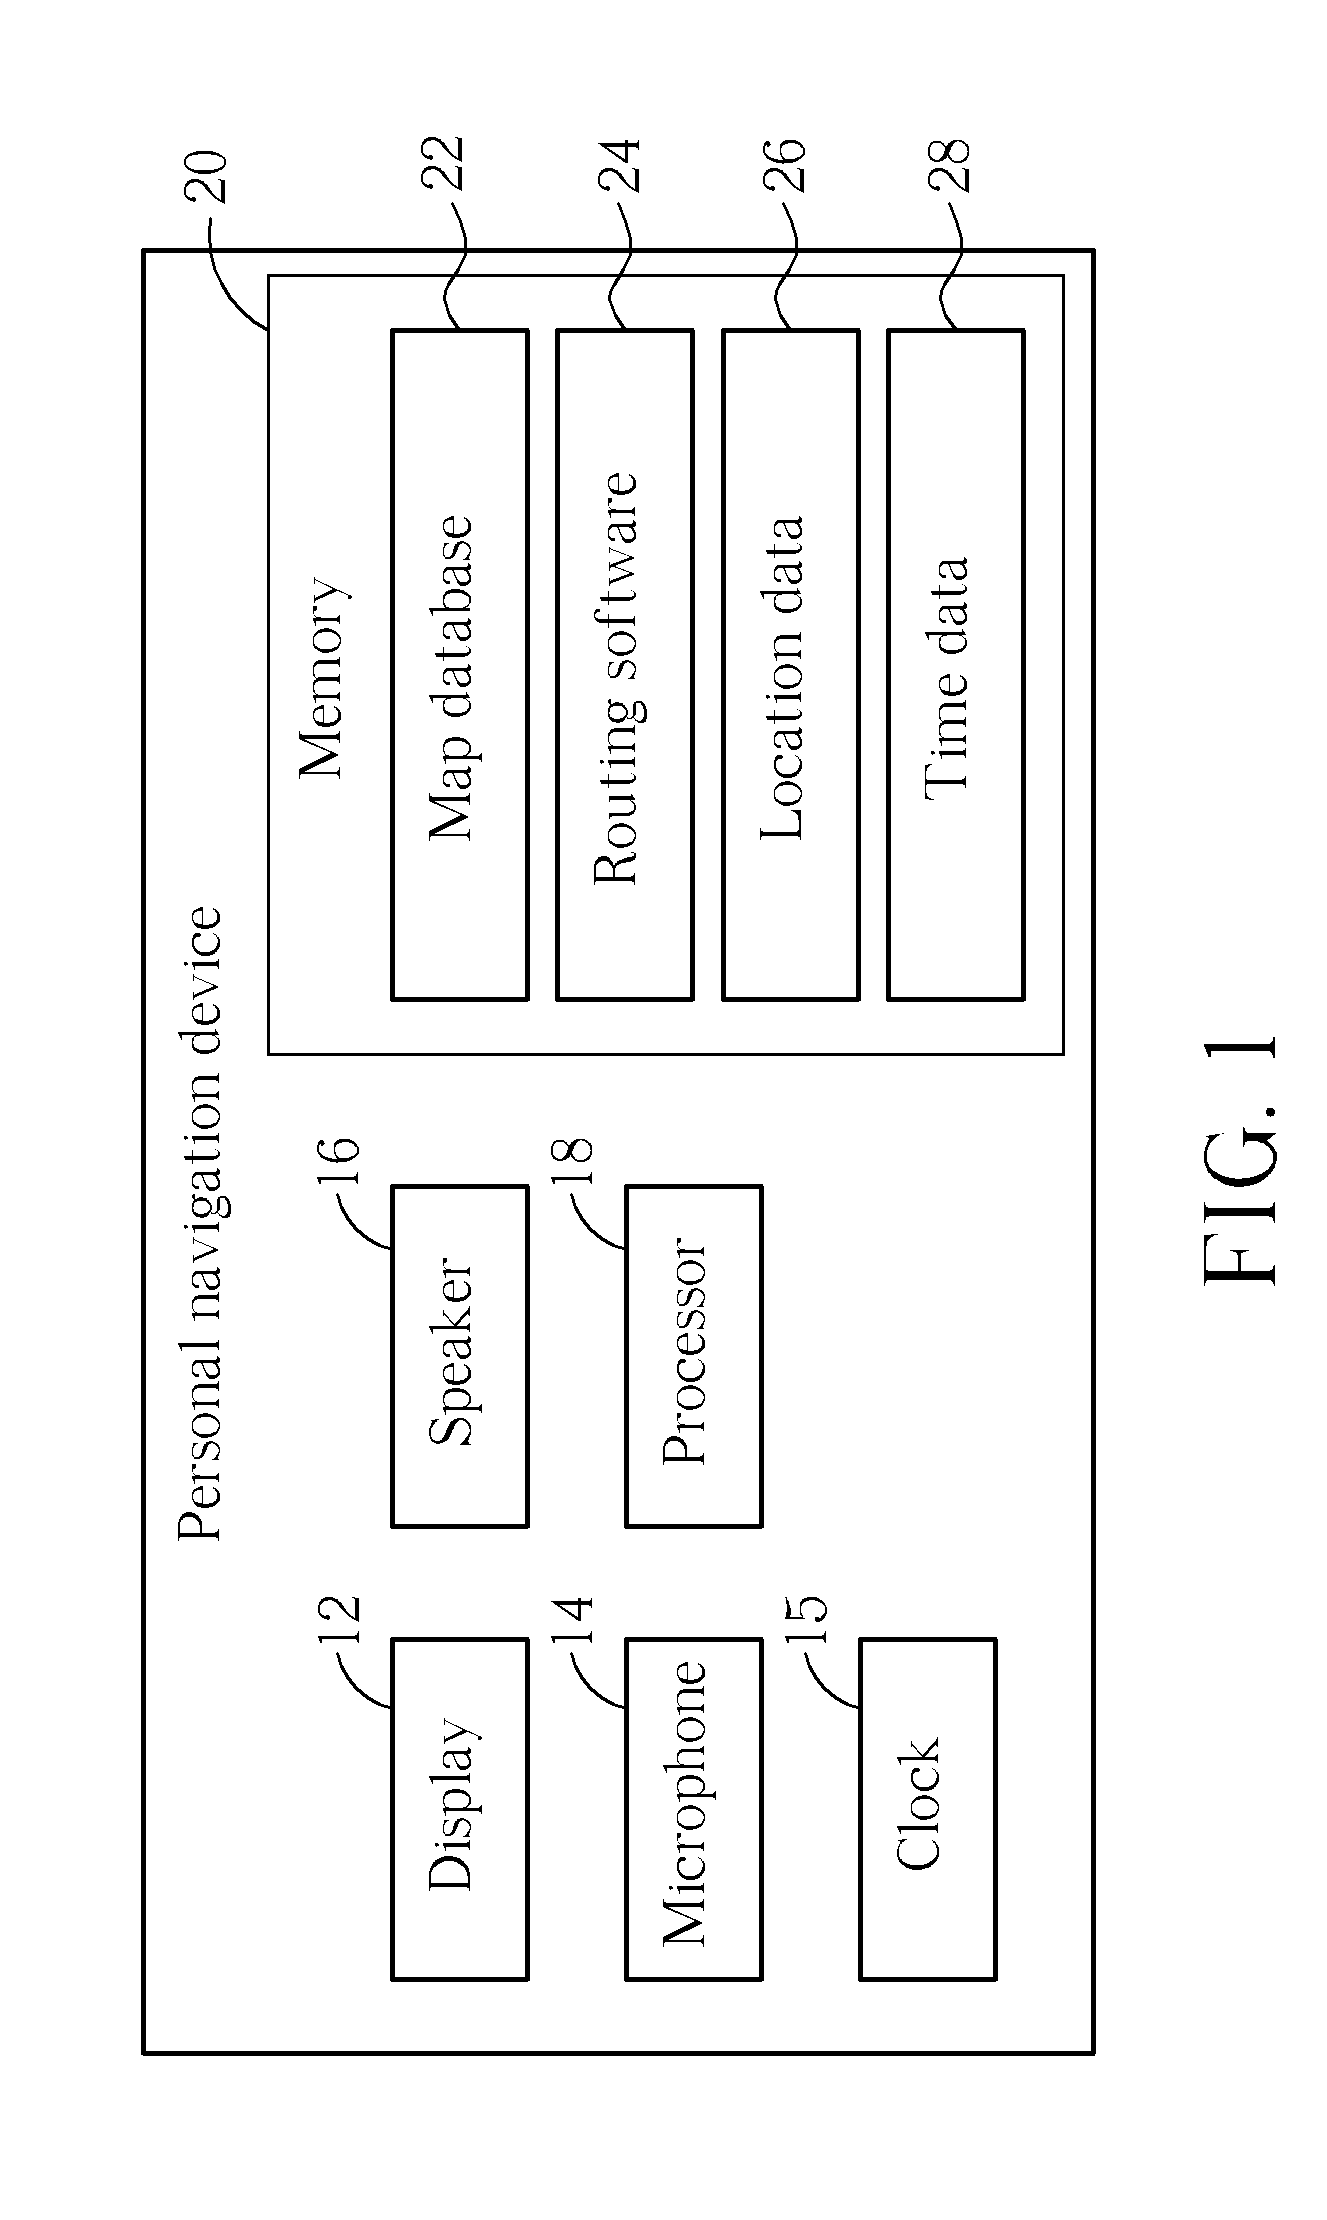 Methods of assisting a user with selecting a route after a personal navigation device transitions from driving mode to walking mode